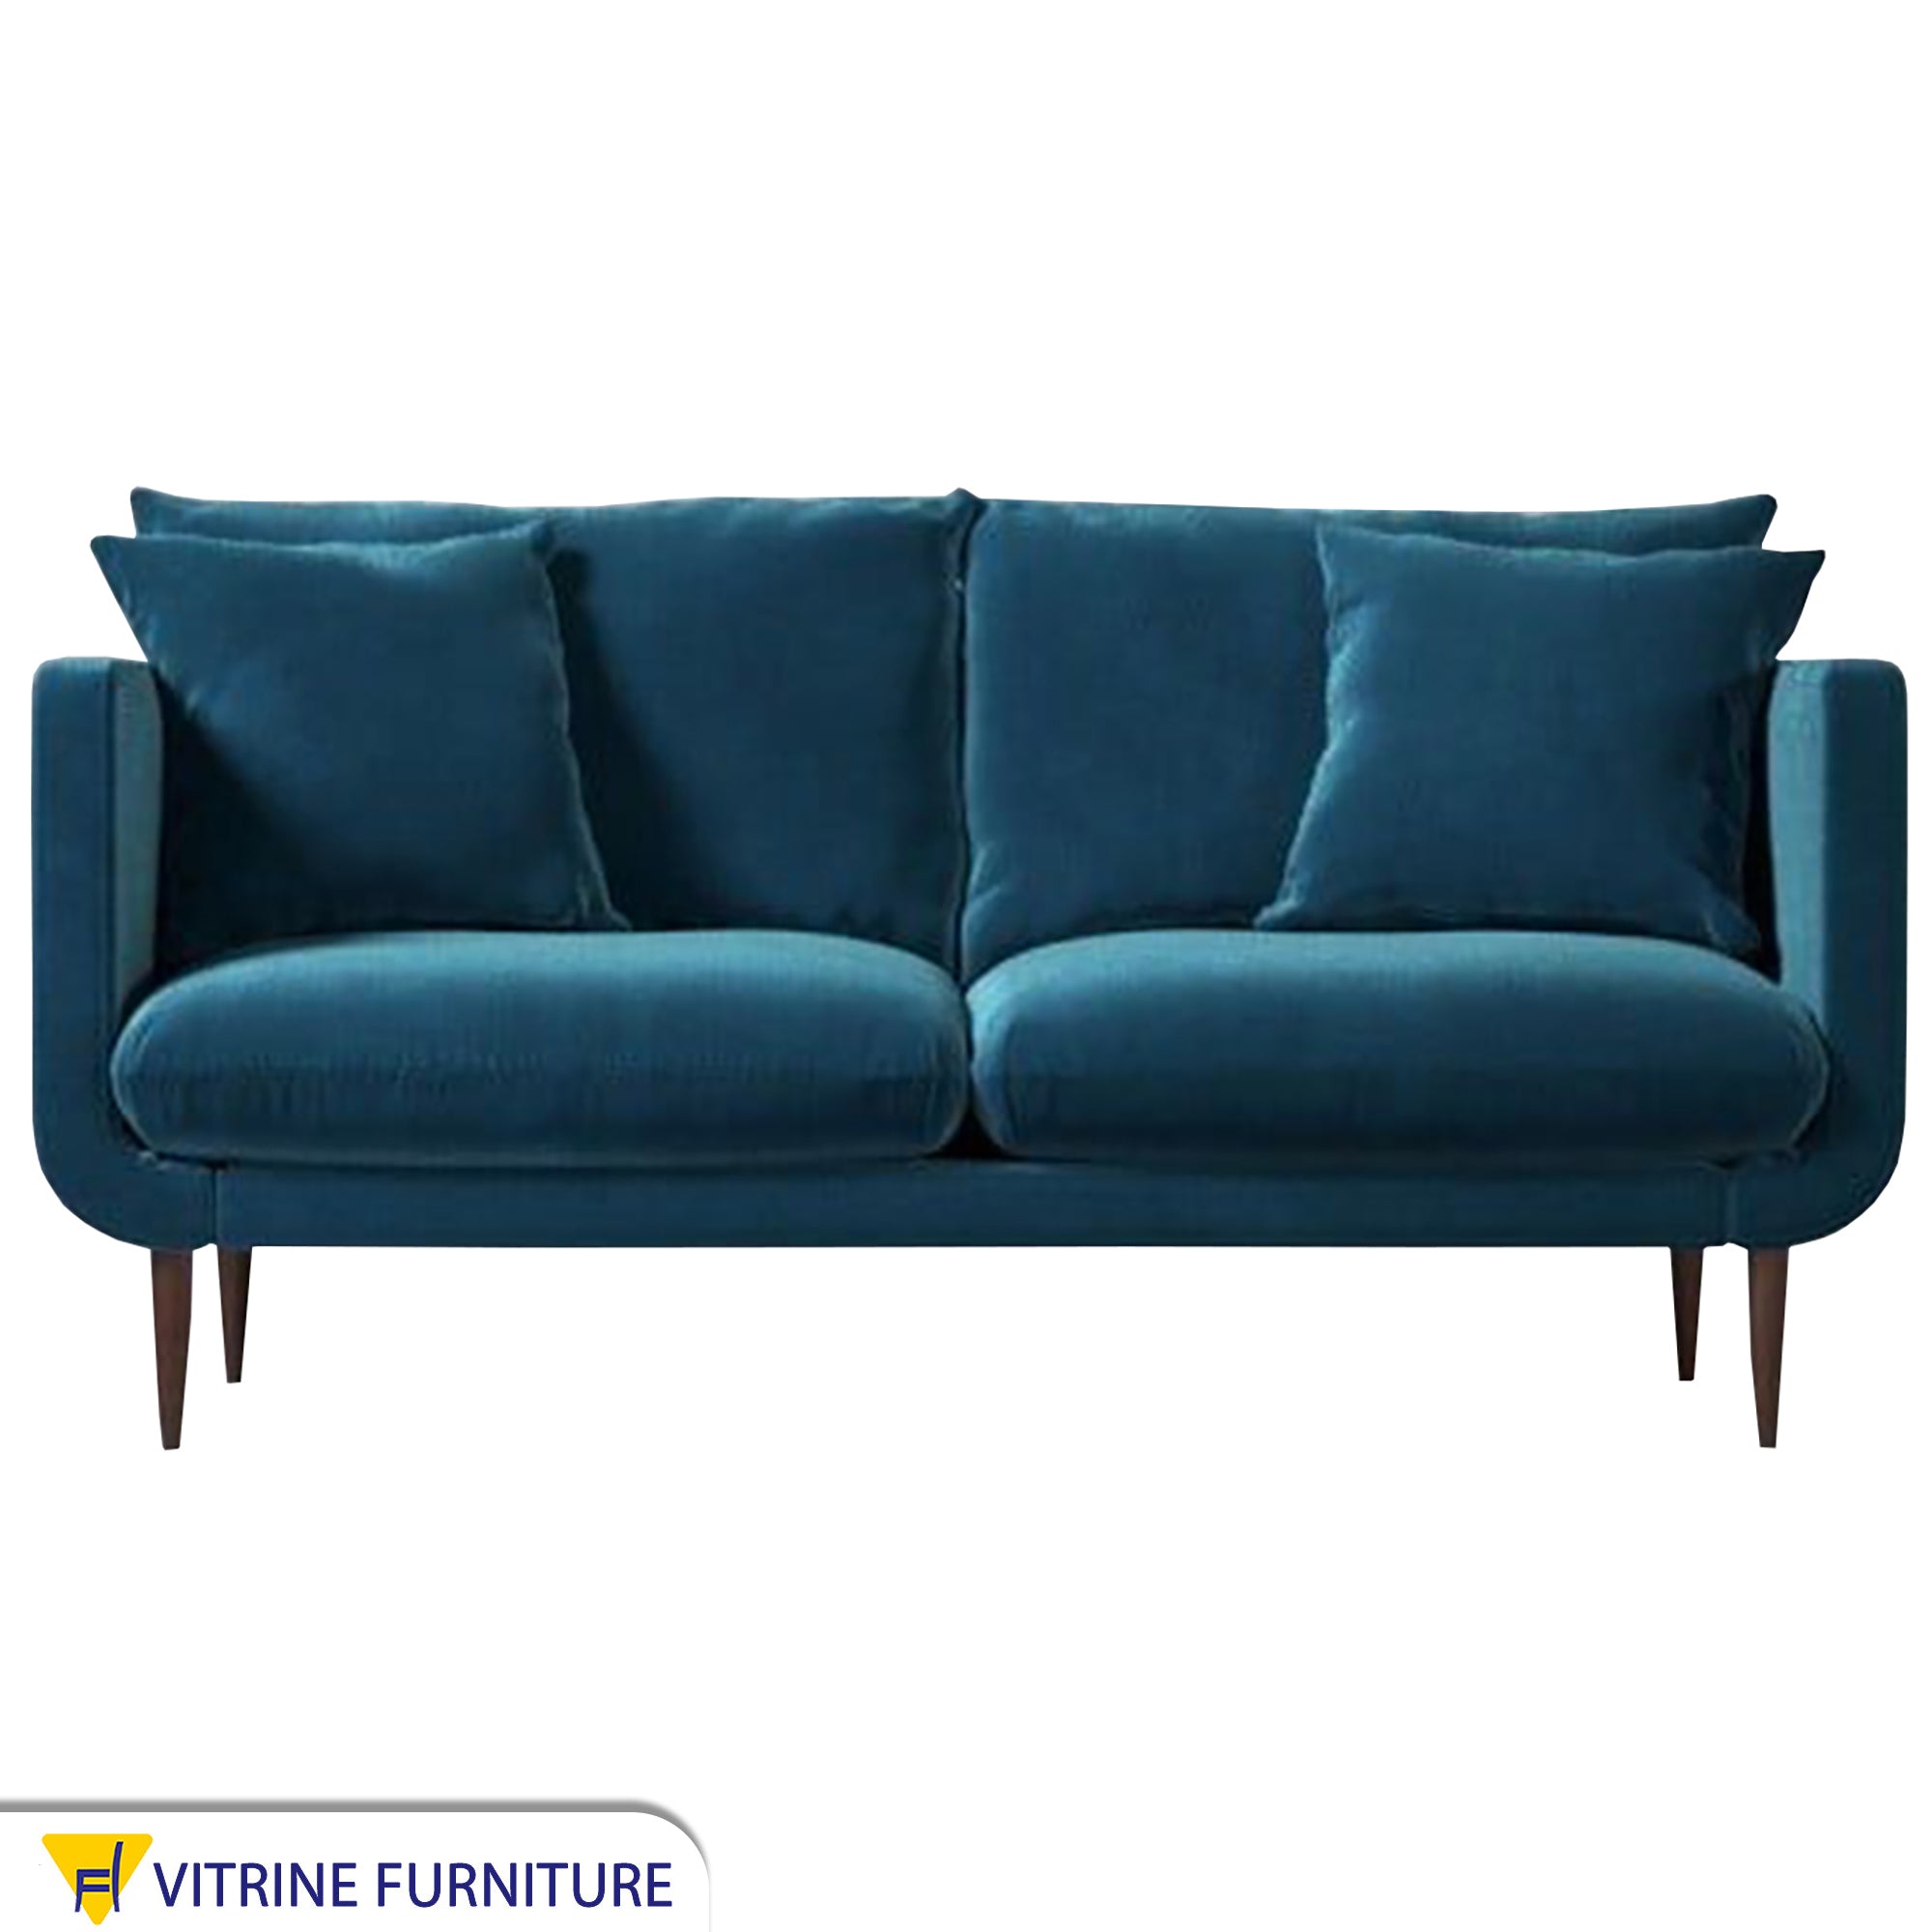 A sofa with thin armrests